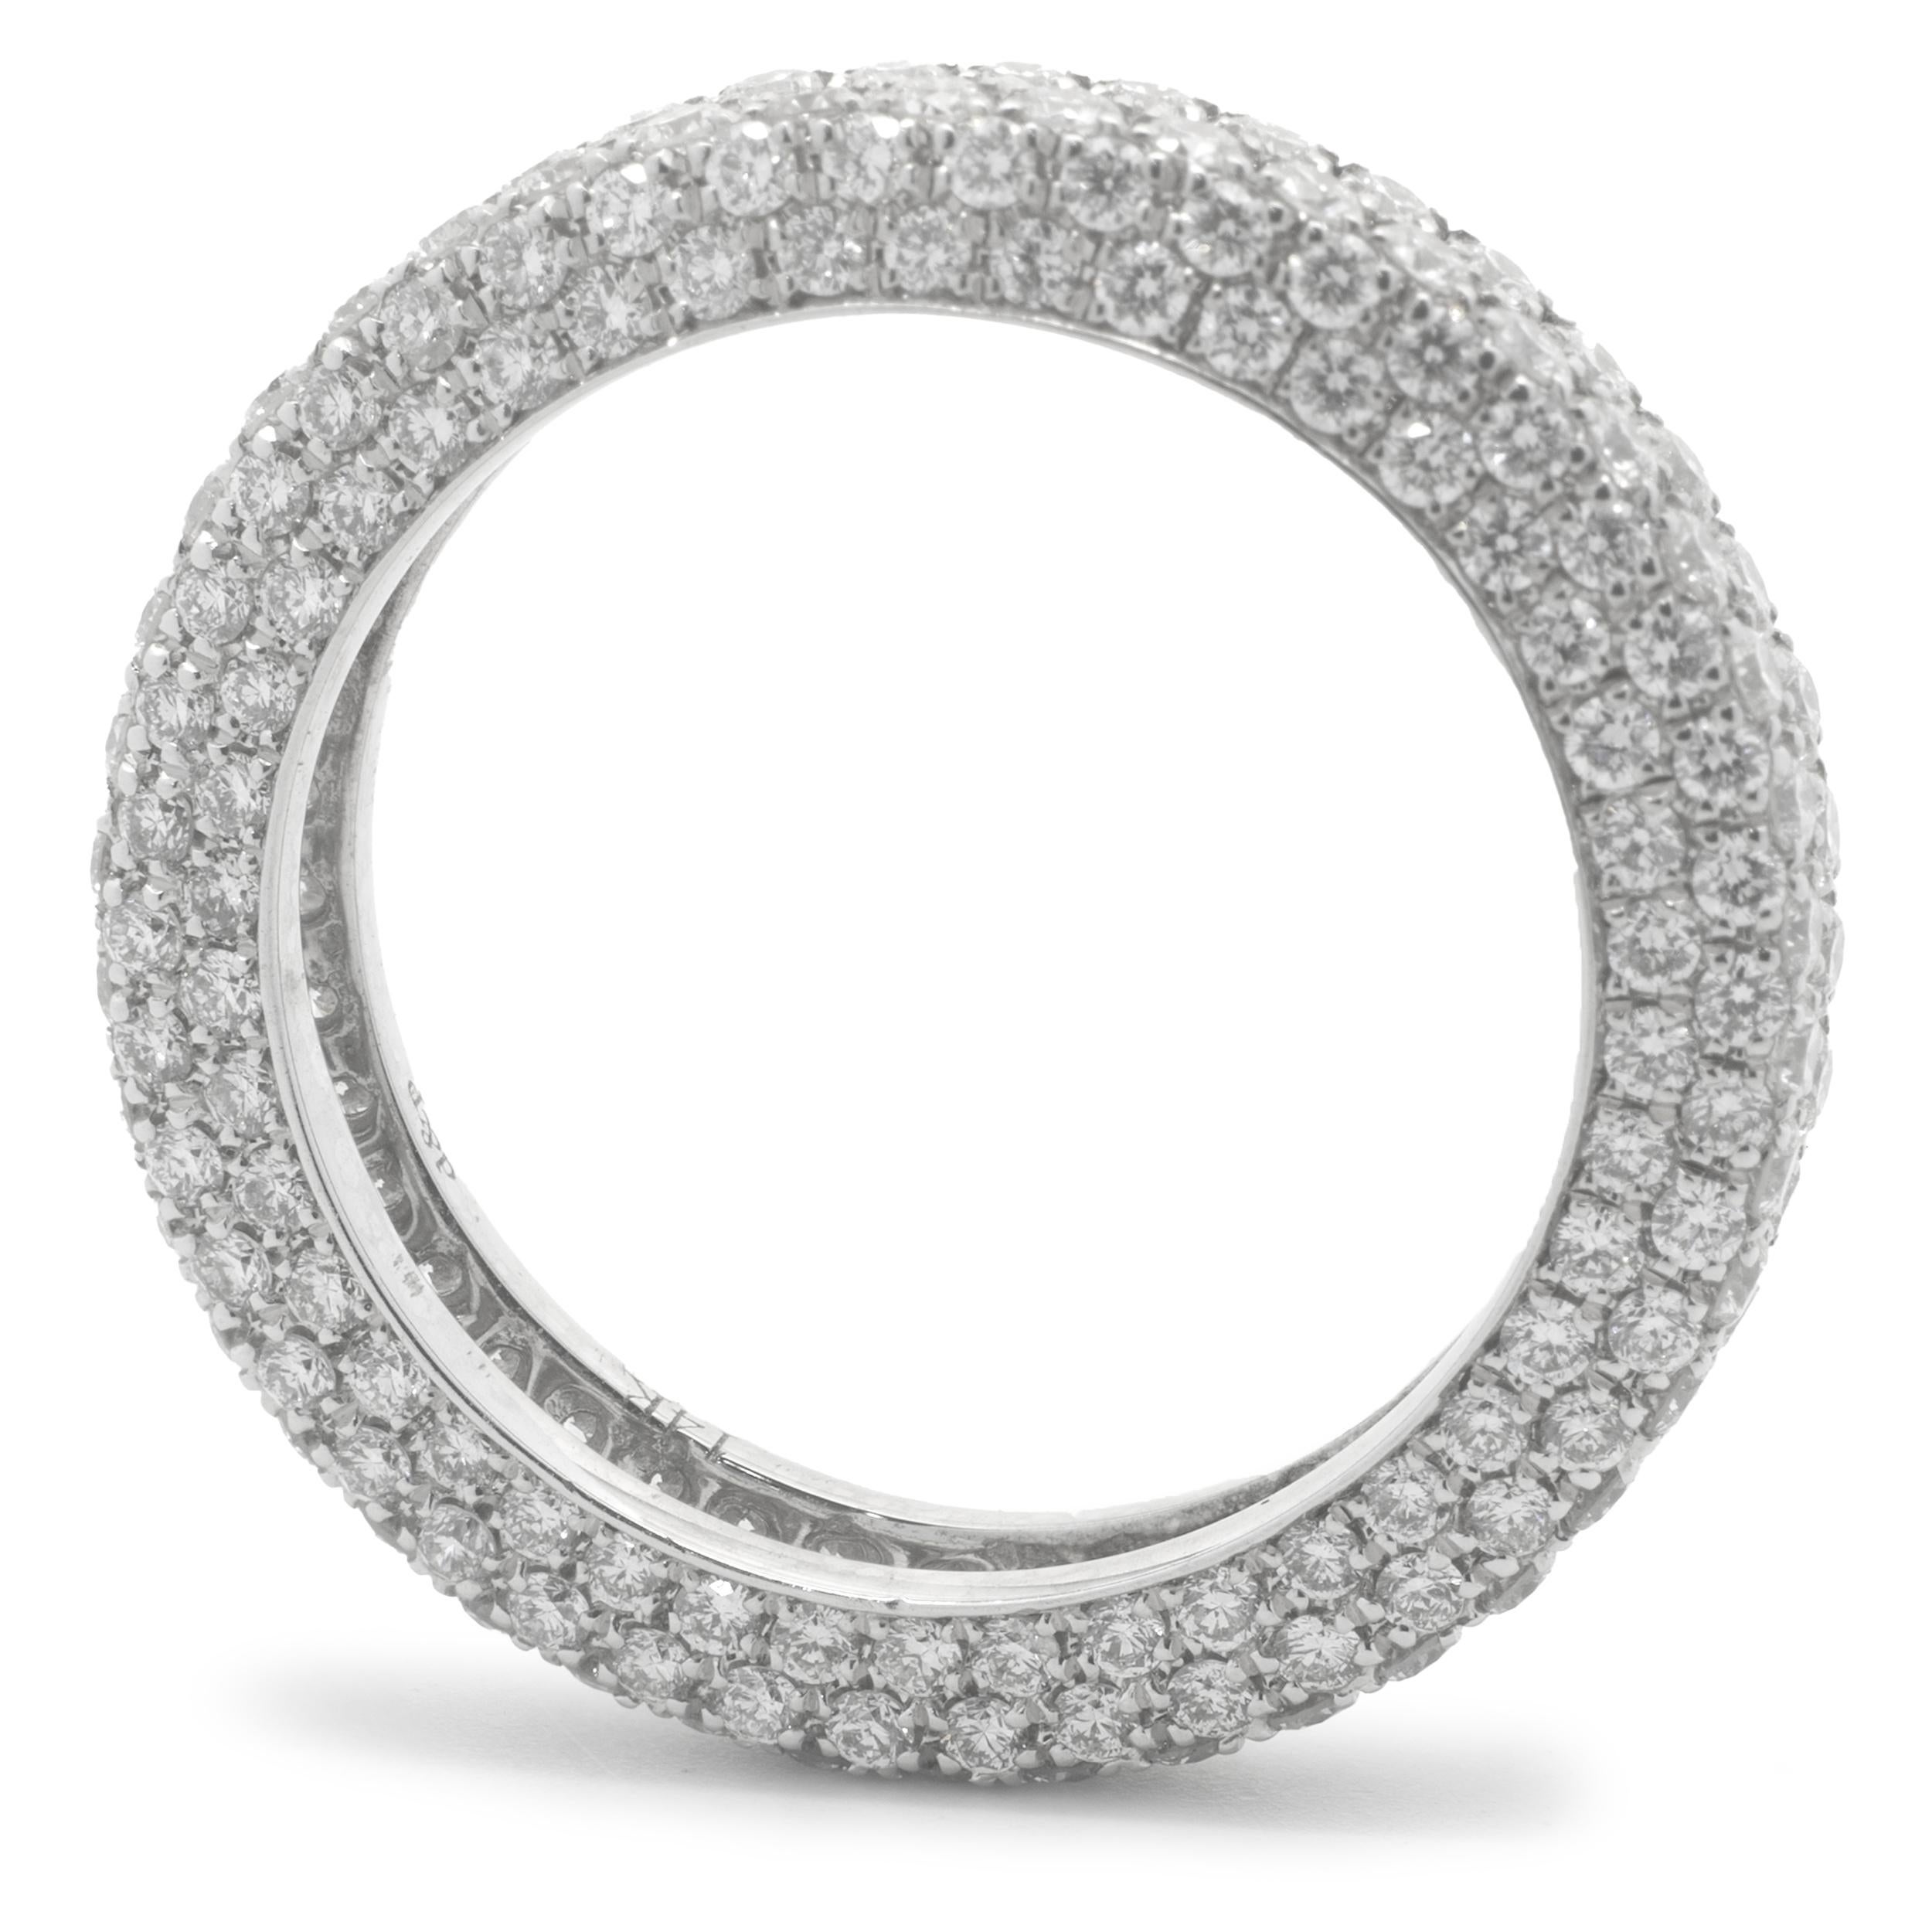 Designer: Custom
Material: 14K white gold
Diamonds: 252 round cut =2.50cttw
Color: G
Clarity: VS
Size: 6
Dimensions: ring measures 4.30mm in width
Weight: 3.65 grams
